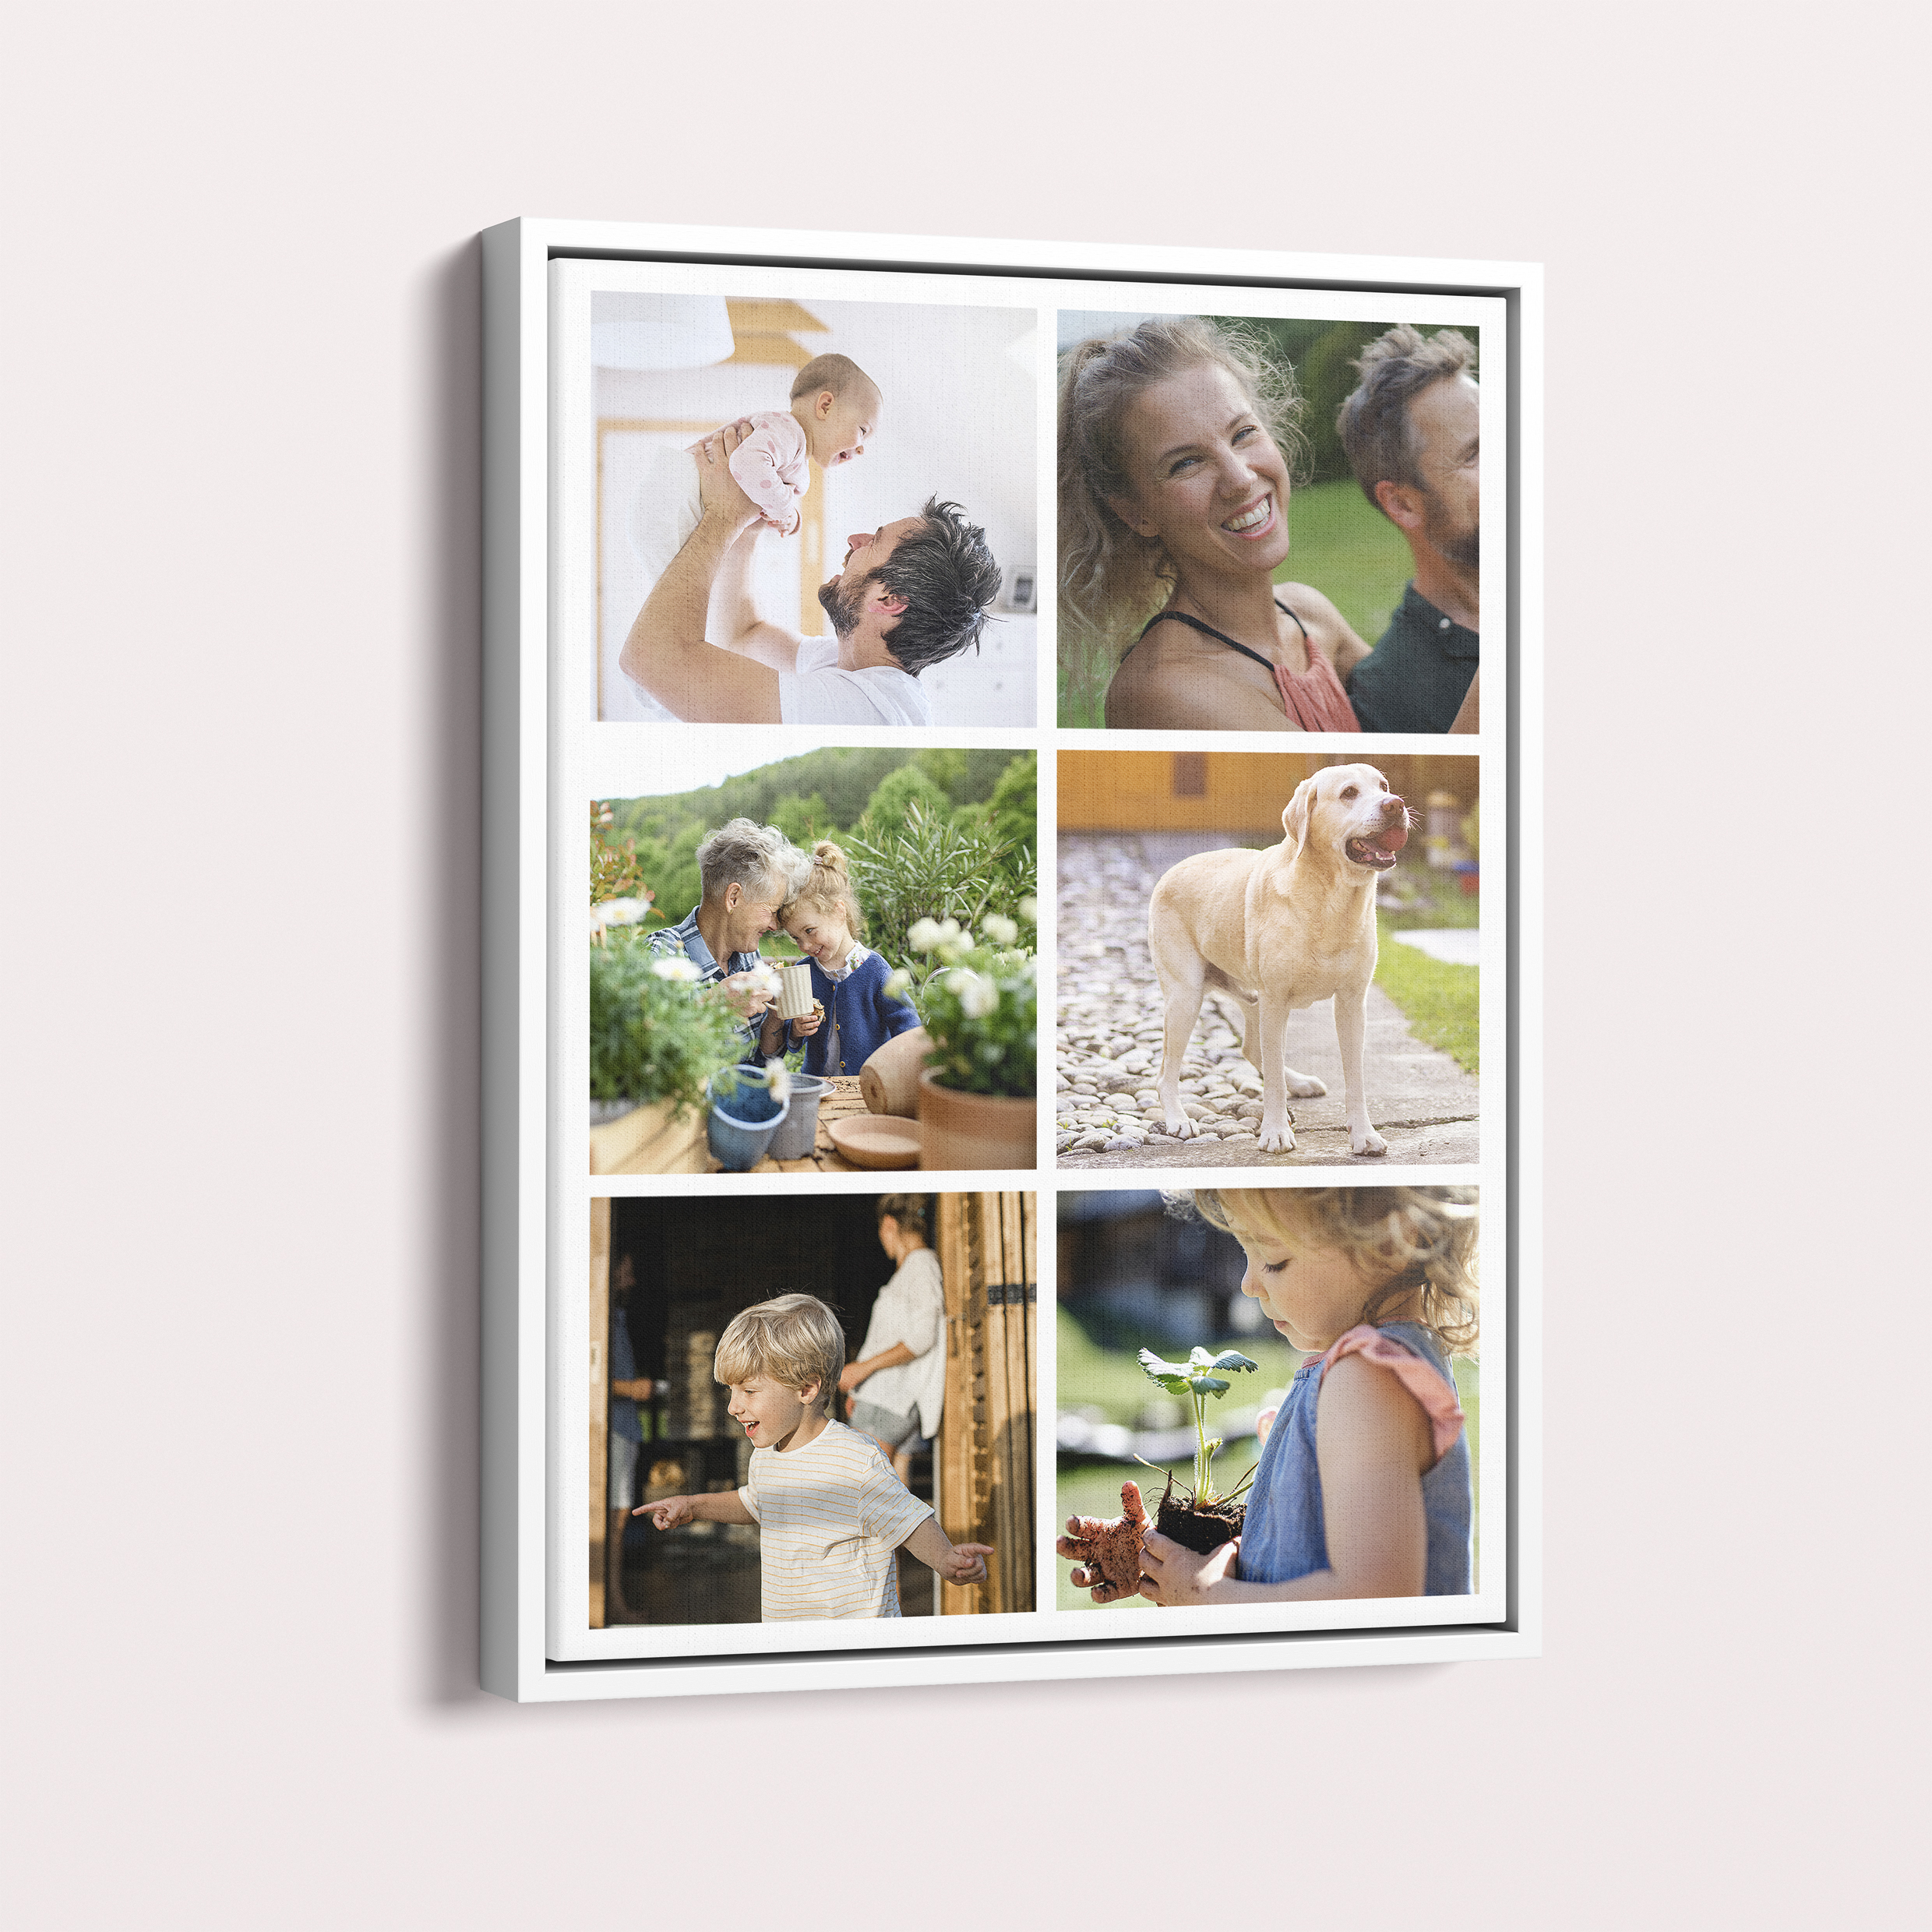 Utterly Printable's Friends Collage Framed Photo Canvas - Personalised Masterpiece for Cherished Moments